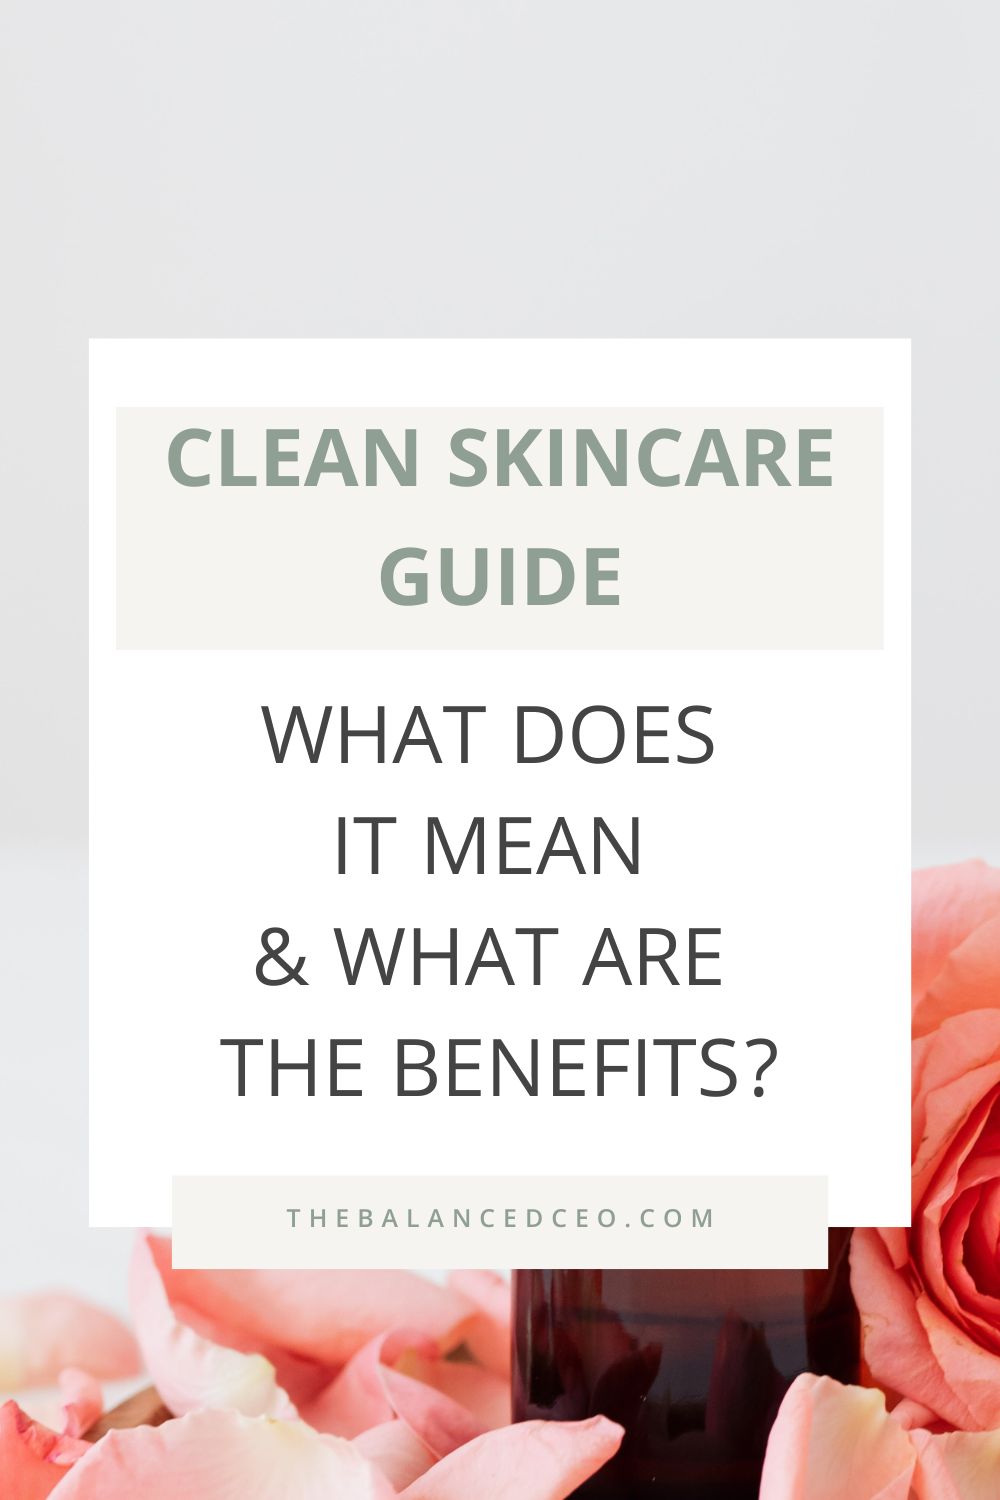 Clean Skincare: What Does it Mean and What Are the Benefits?